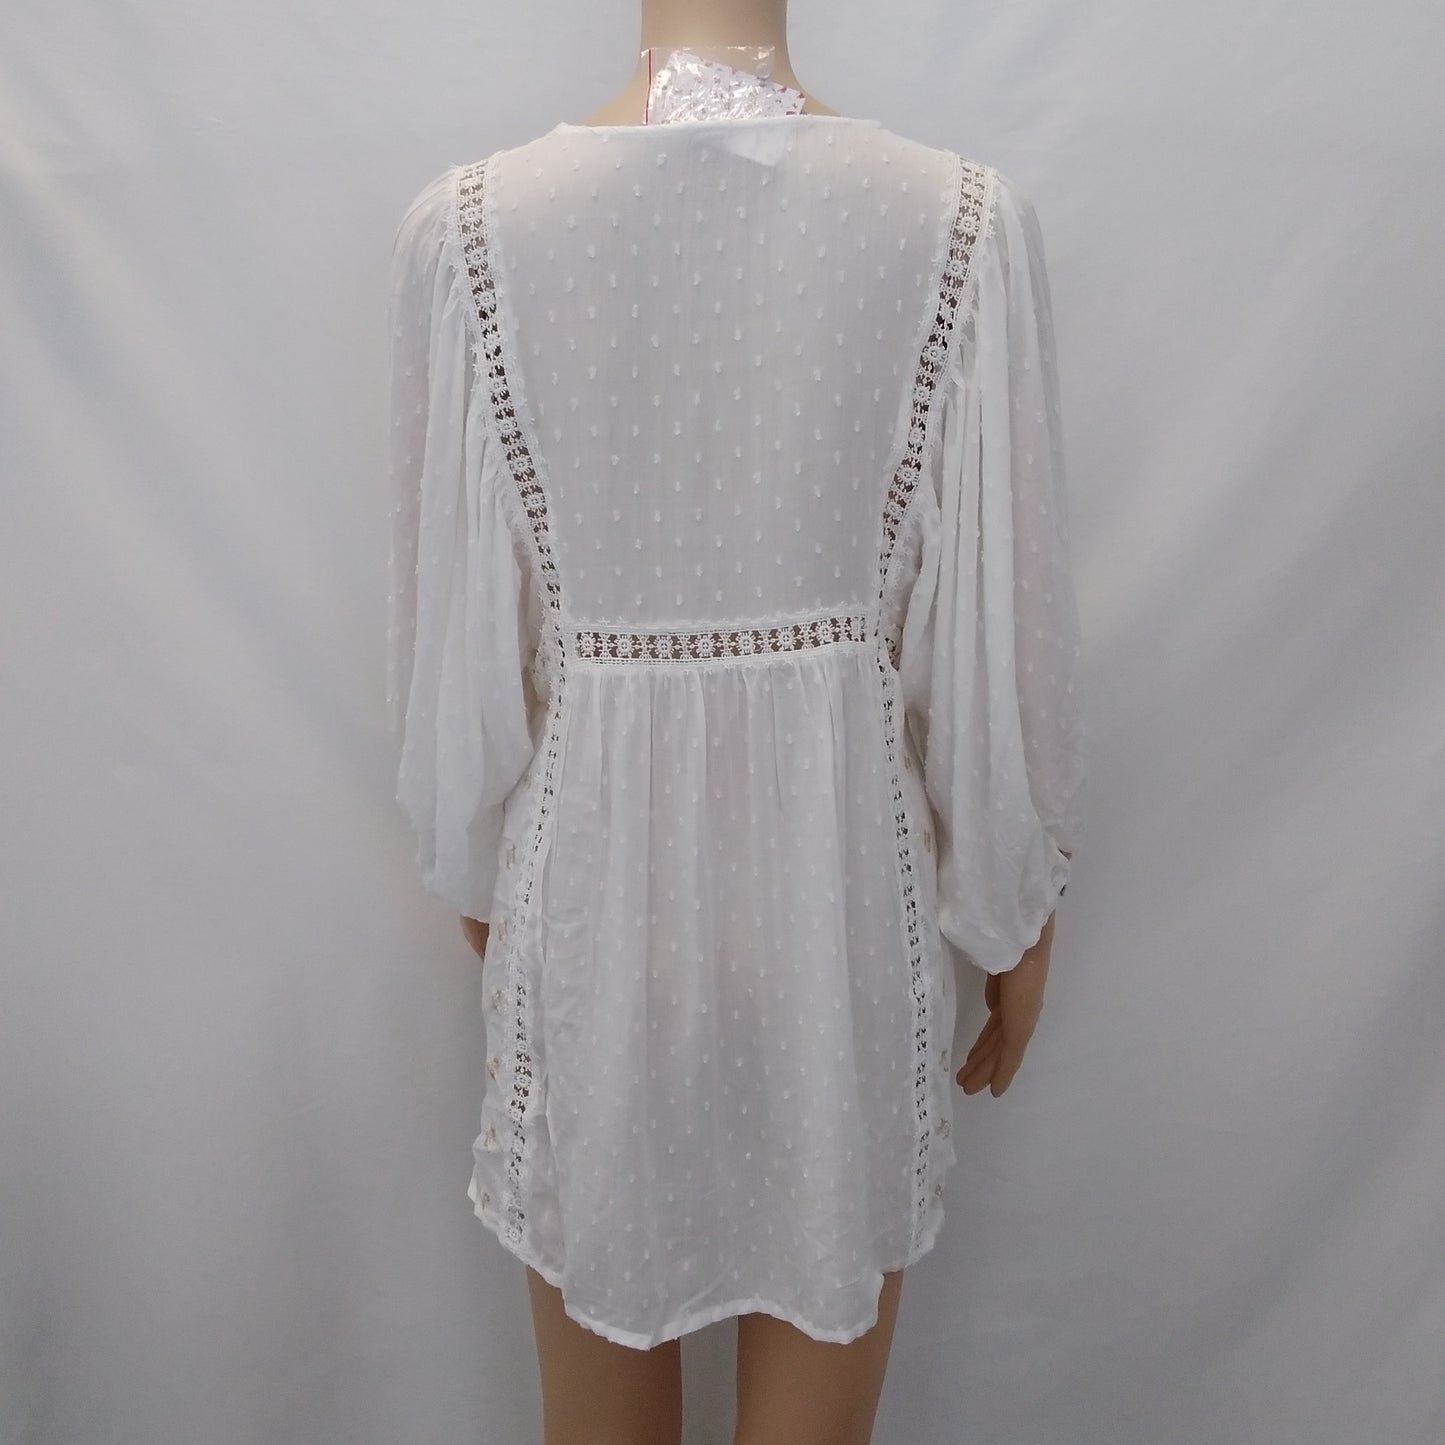 NWT - Free People Ivory Embroidered Keyhole Tunic Top - S